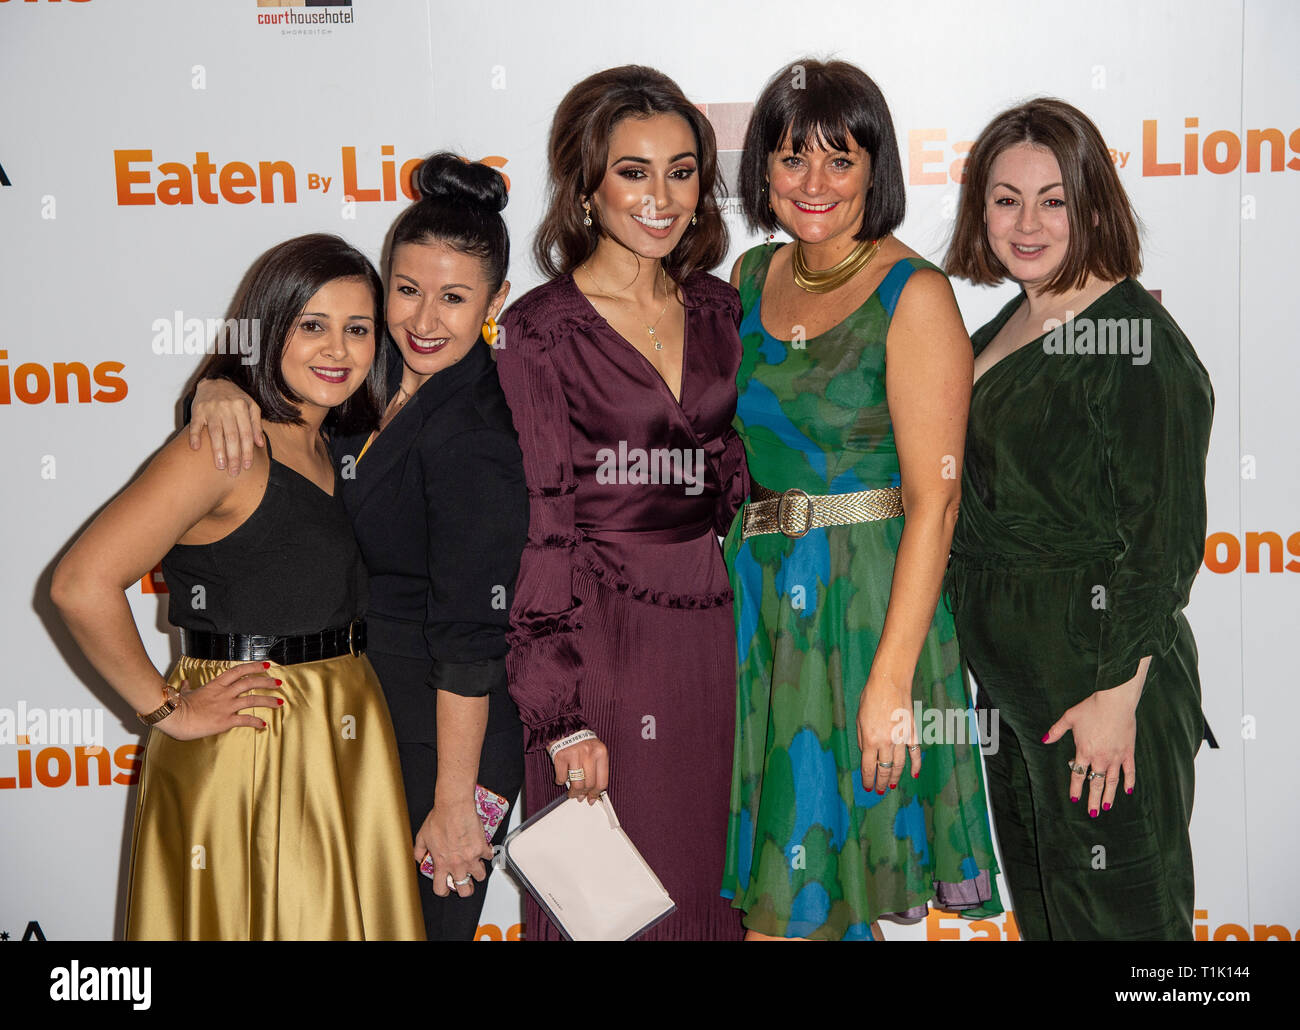 (L to R) Natalie Davies, Hayley Tamaddon, Shila Iqbal, Hannah Stevenson and Sarah Hoare attend the Eaten By Lions film premiere. Stock Photo